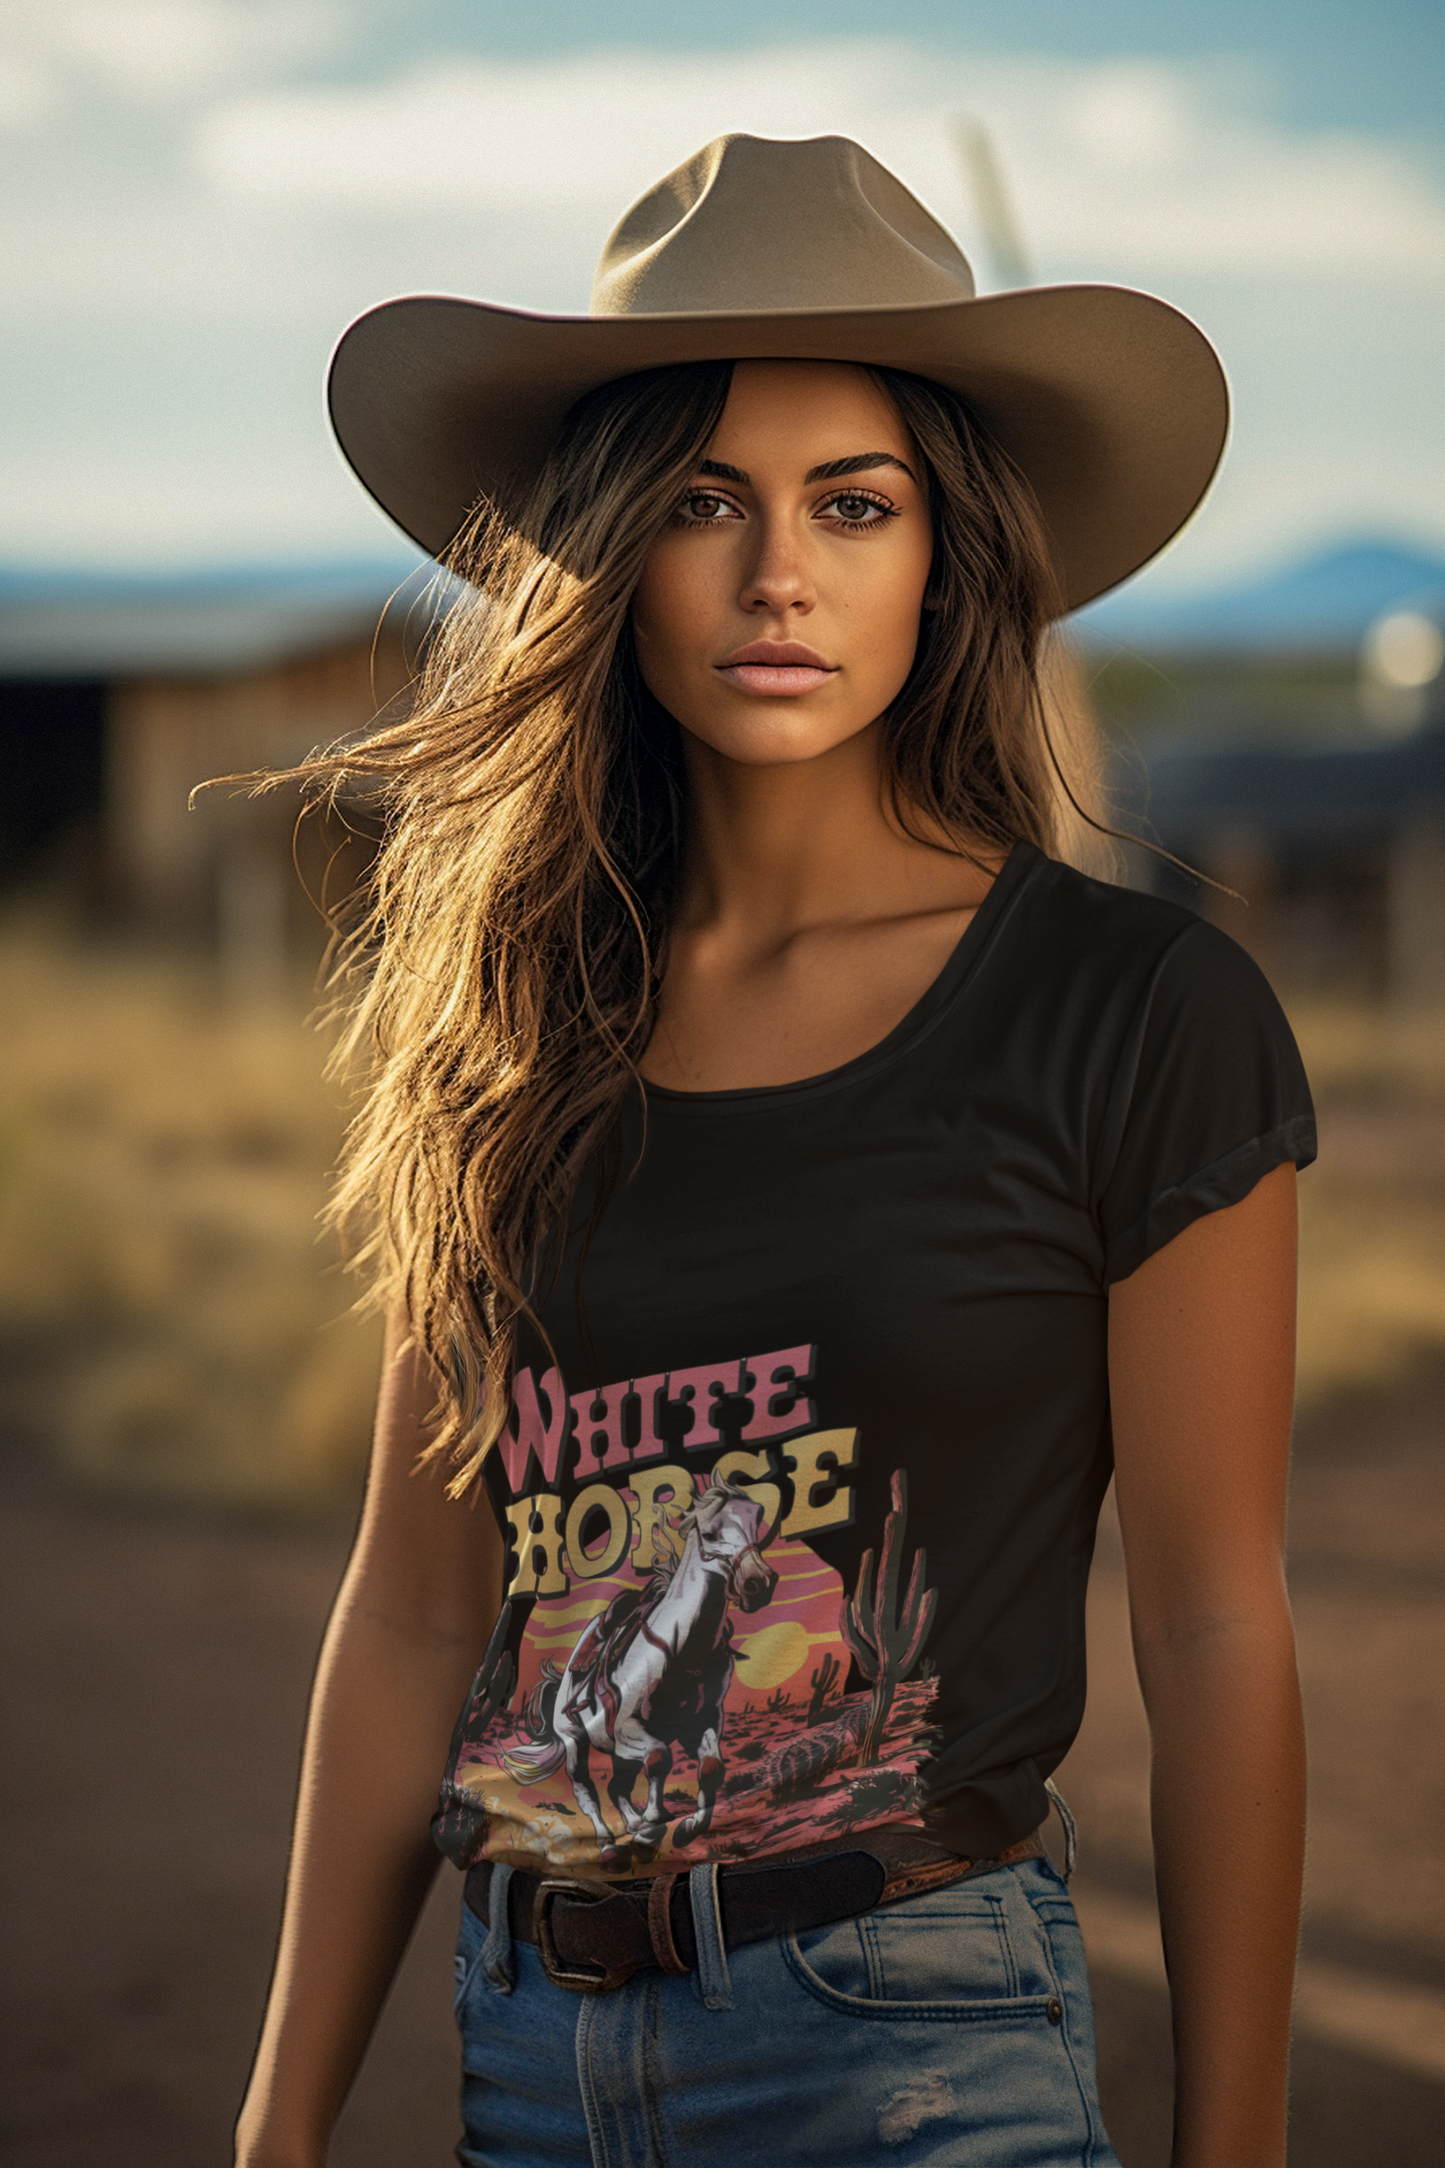 Western White Horse Tshirt [FEEL THE COUNTRY MUSIC]